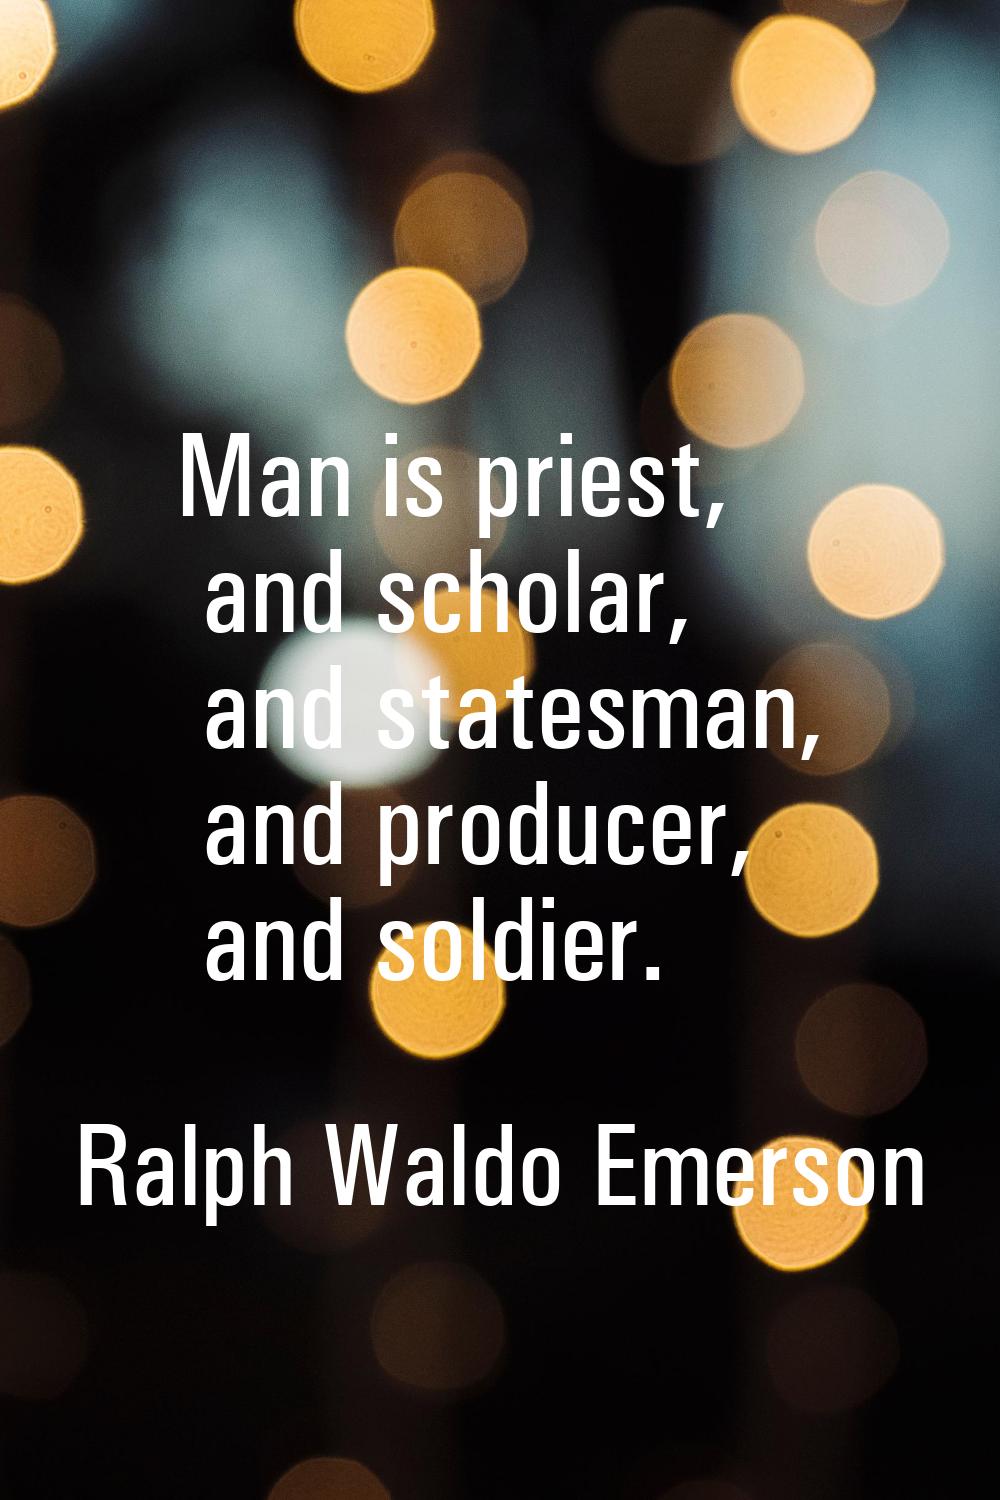 Man is priest, and scholar, and statesman, and producer, and soldier.